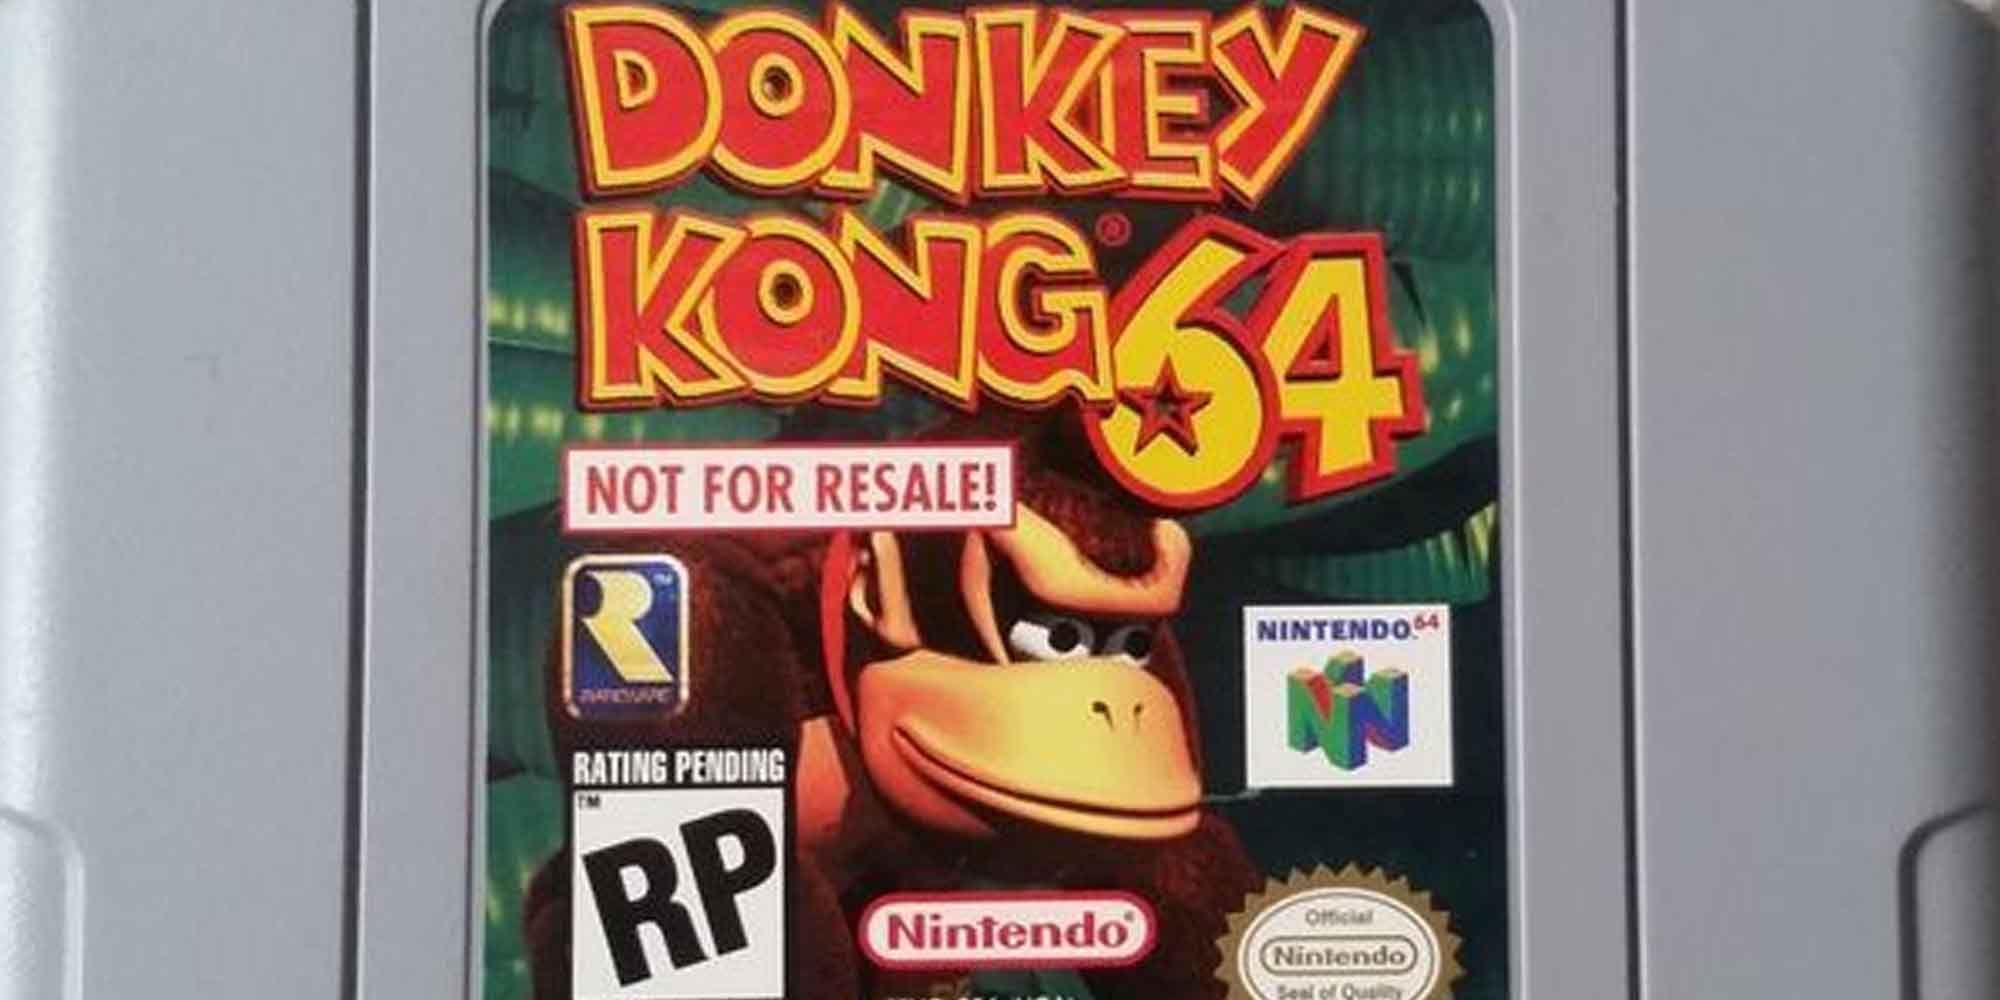 Donkey Kong 64 in a gray cartridge for the Nintendo 64